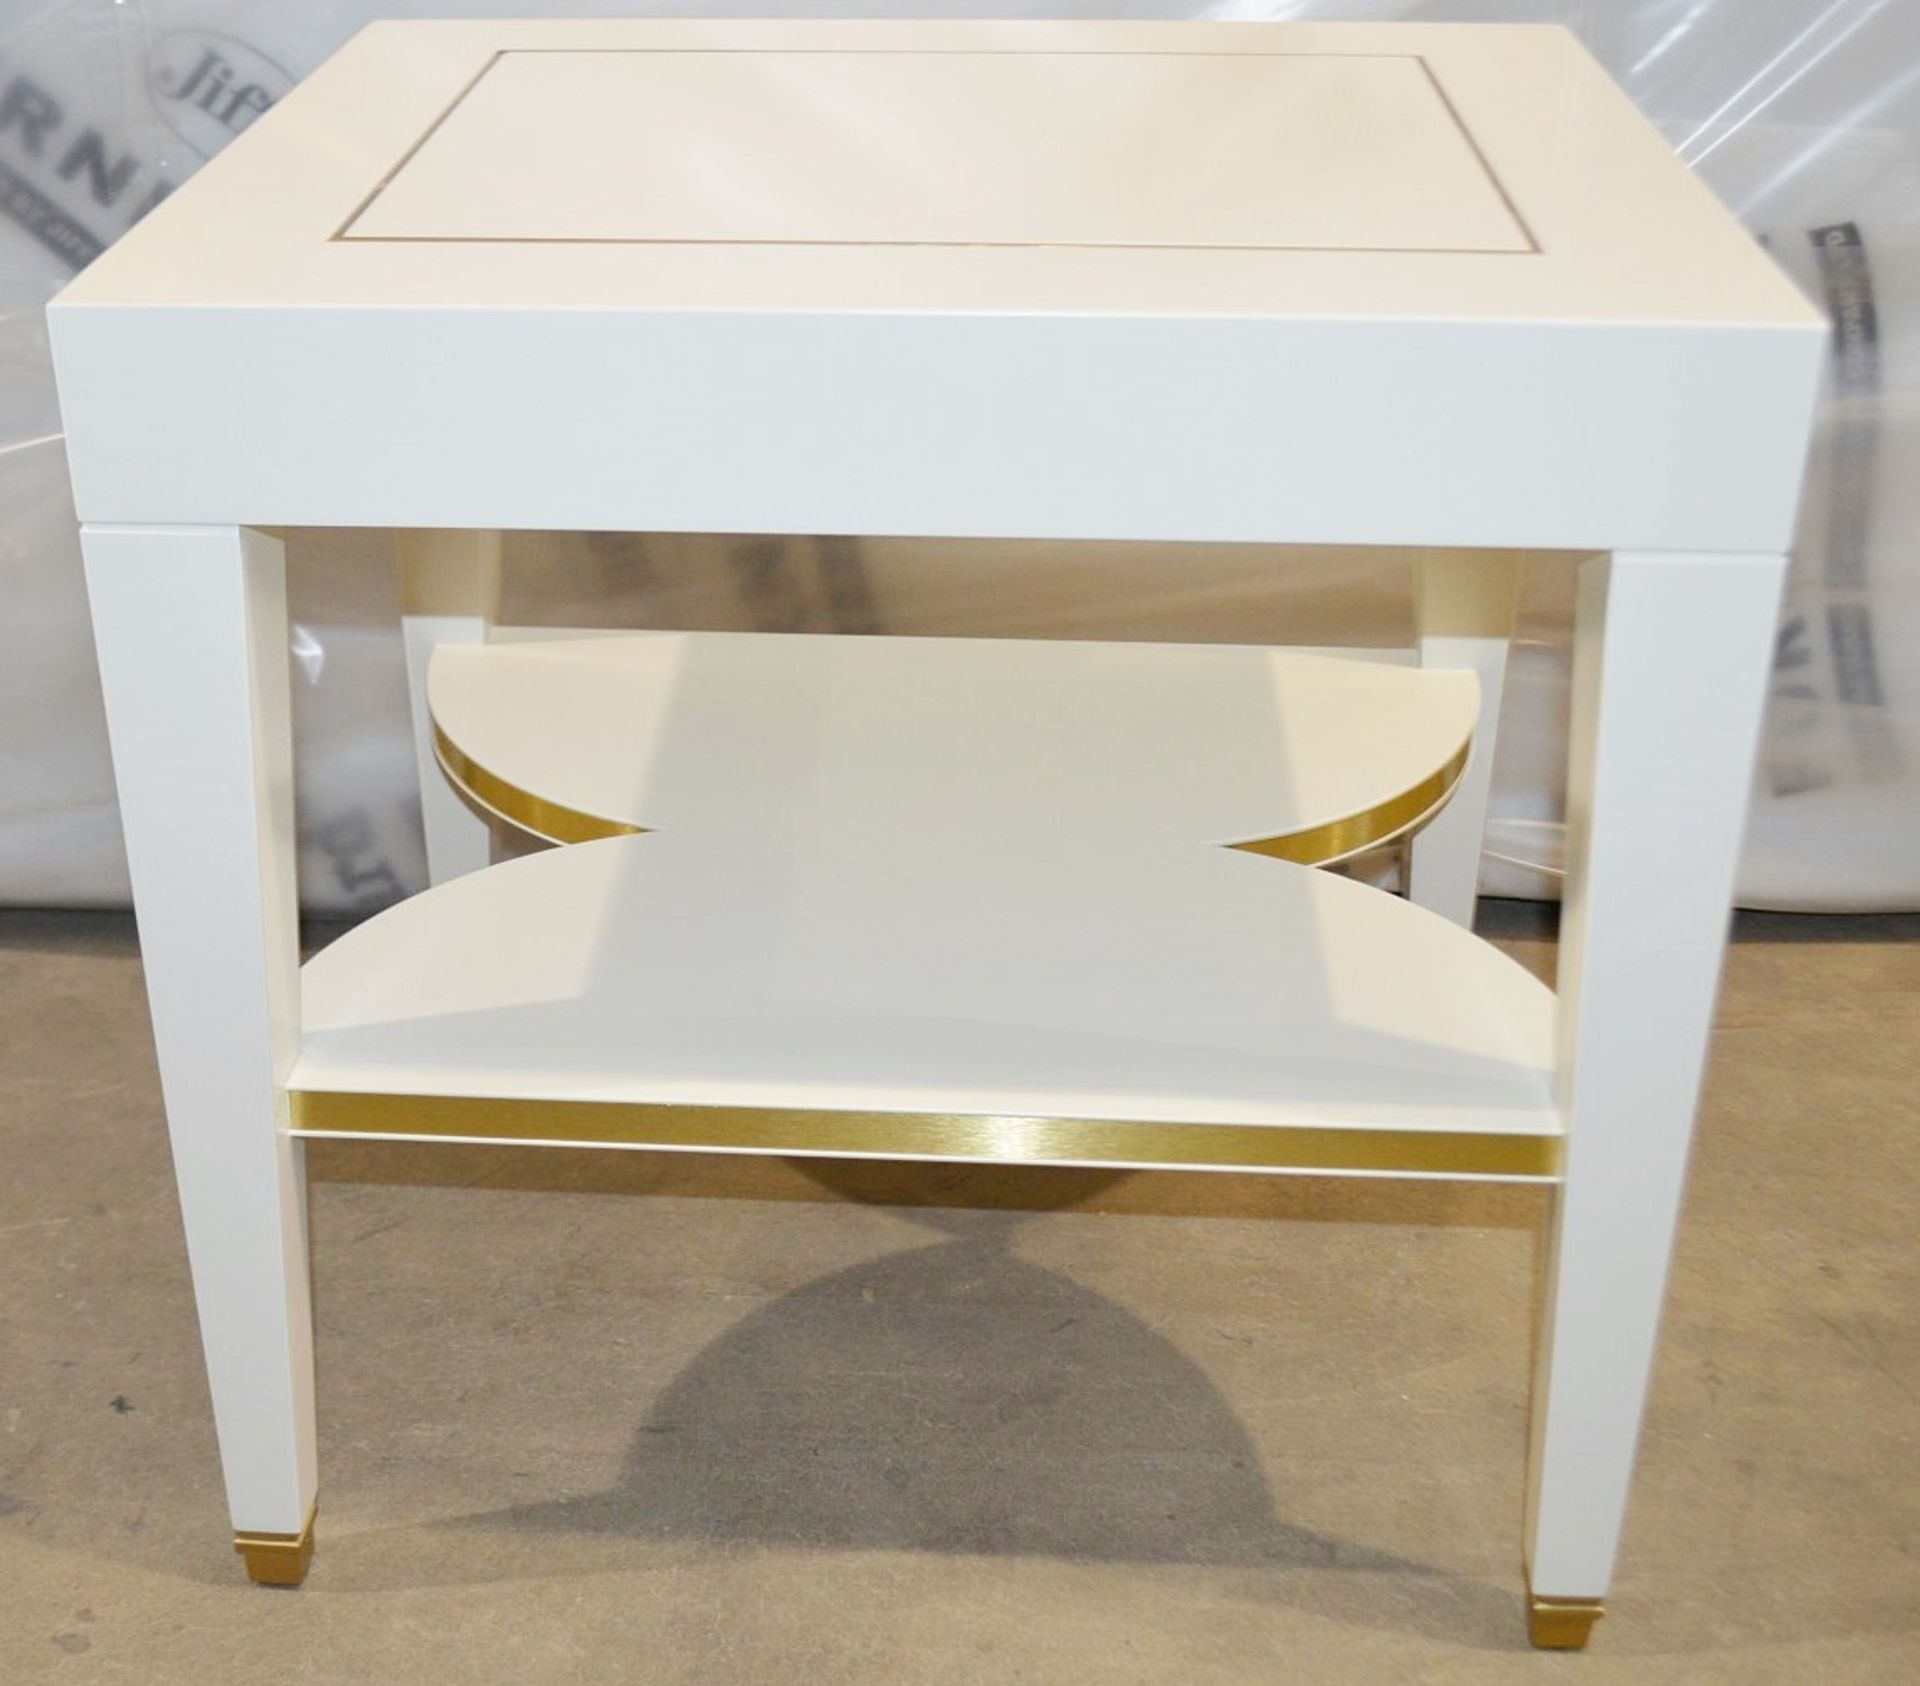 1 x JUSTIN VAN BREDA 'Alexander' Mahogany Occasional Side Table In Cream - Dimensions: W60 x D50 x H - Image 2 of 6